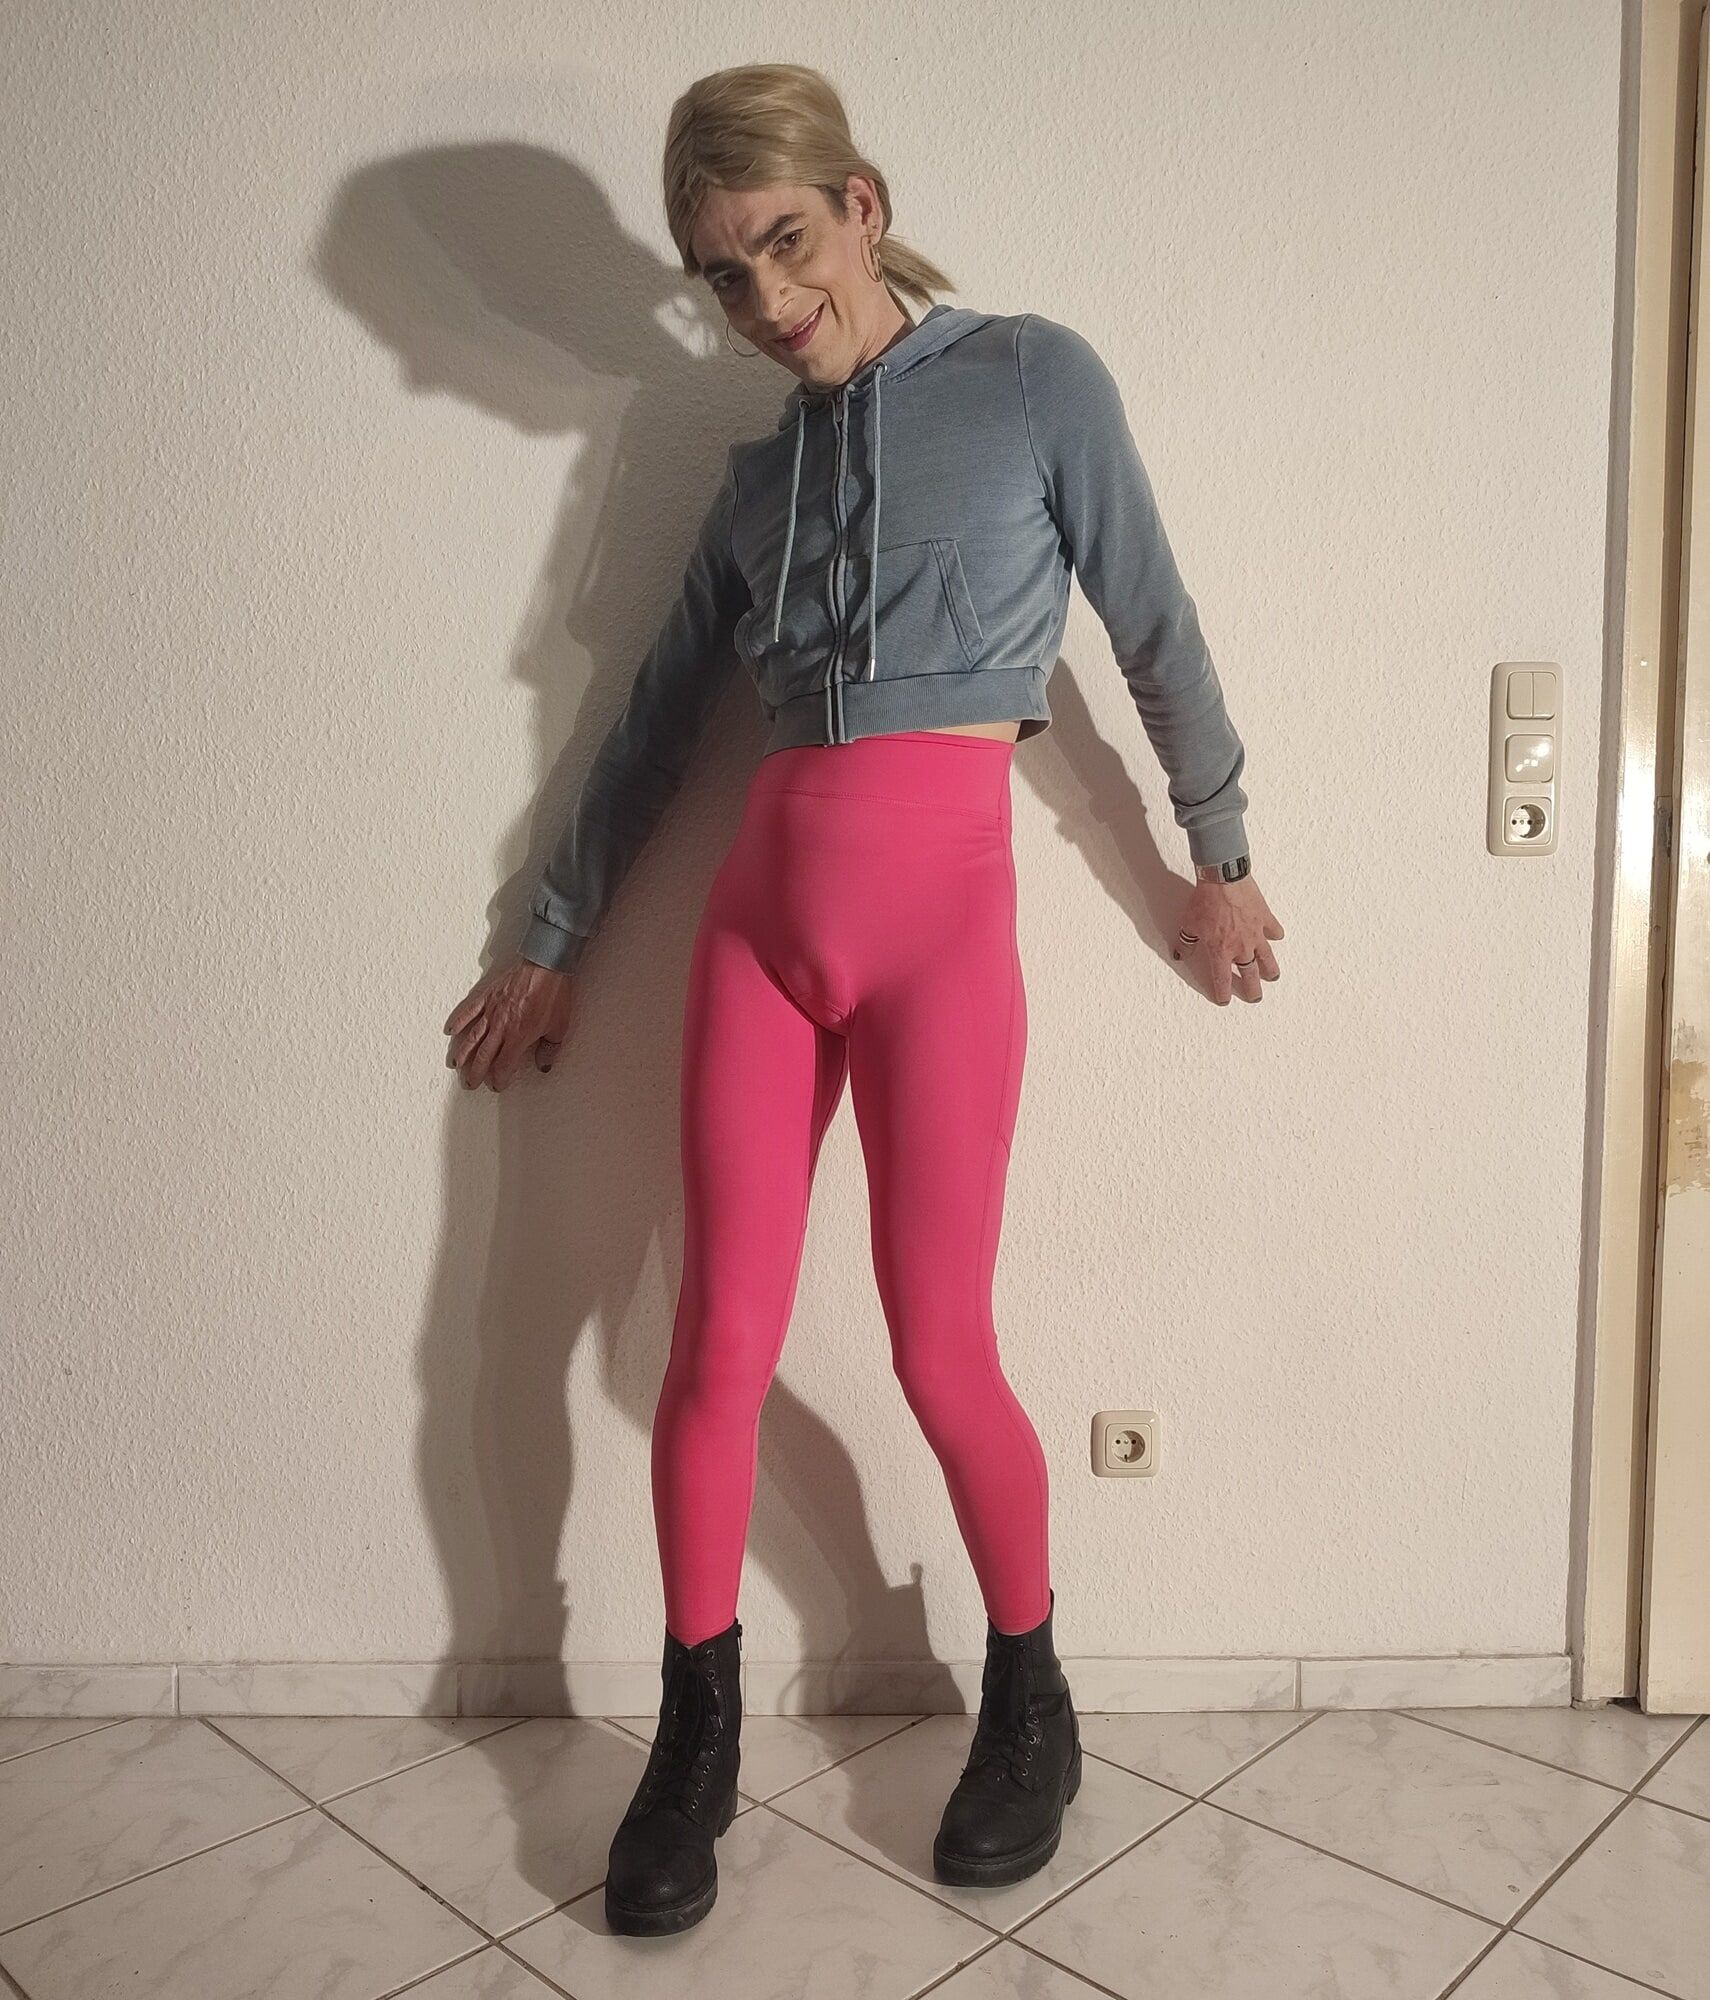 nonbinary femboy slut showing some hot outfits #8